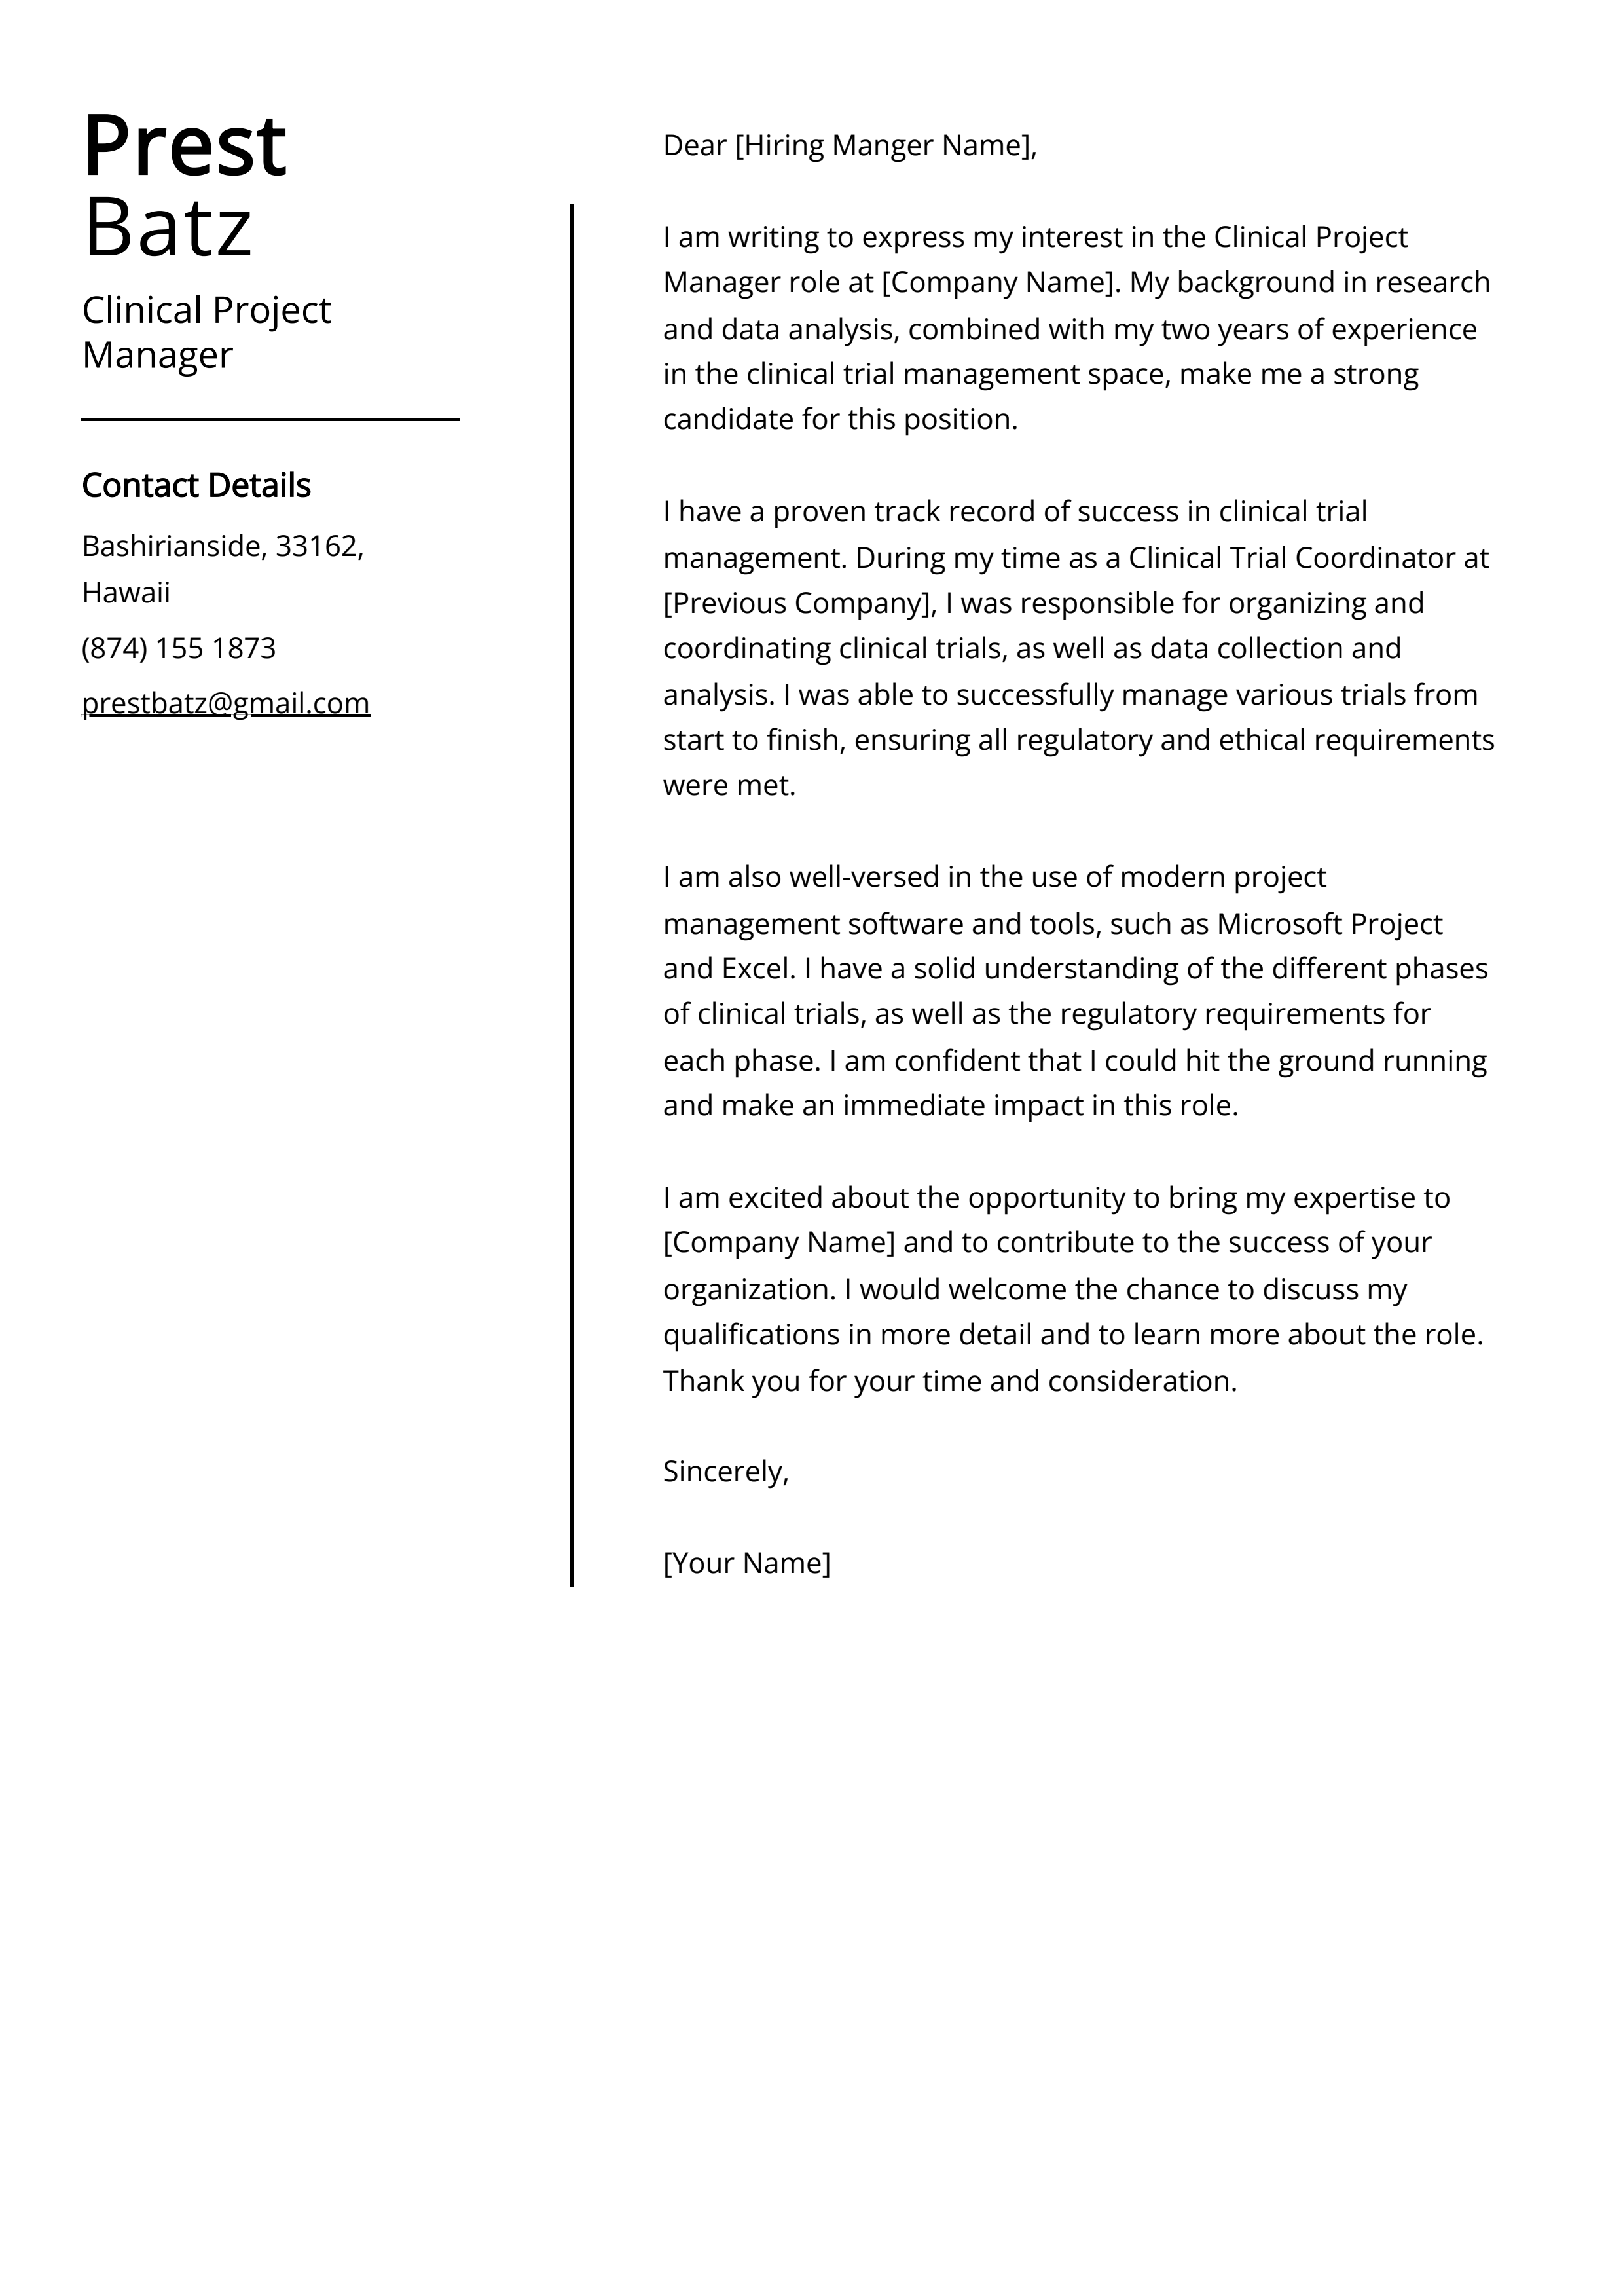 Clinical Project Manager Cover Letter Example